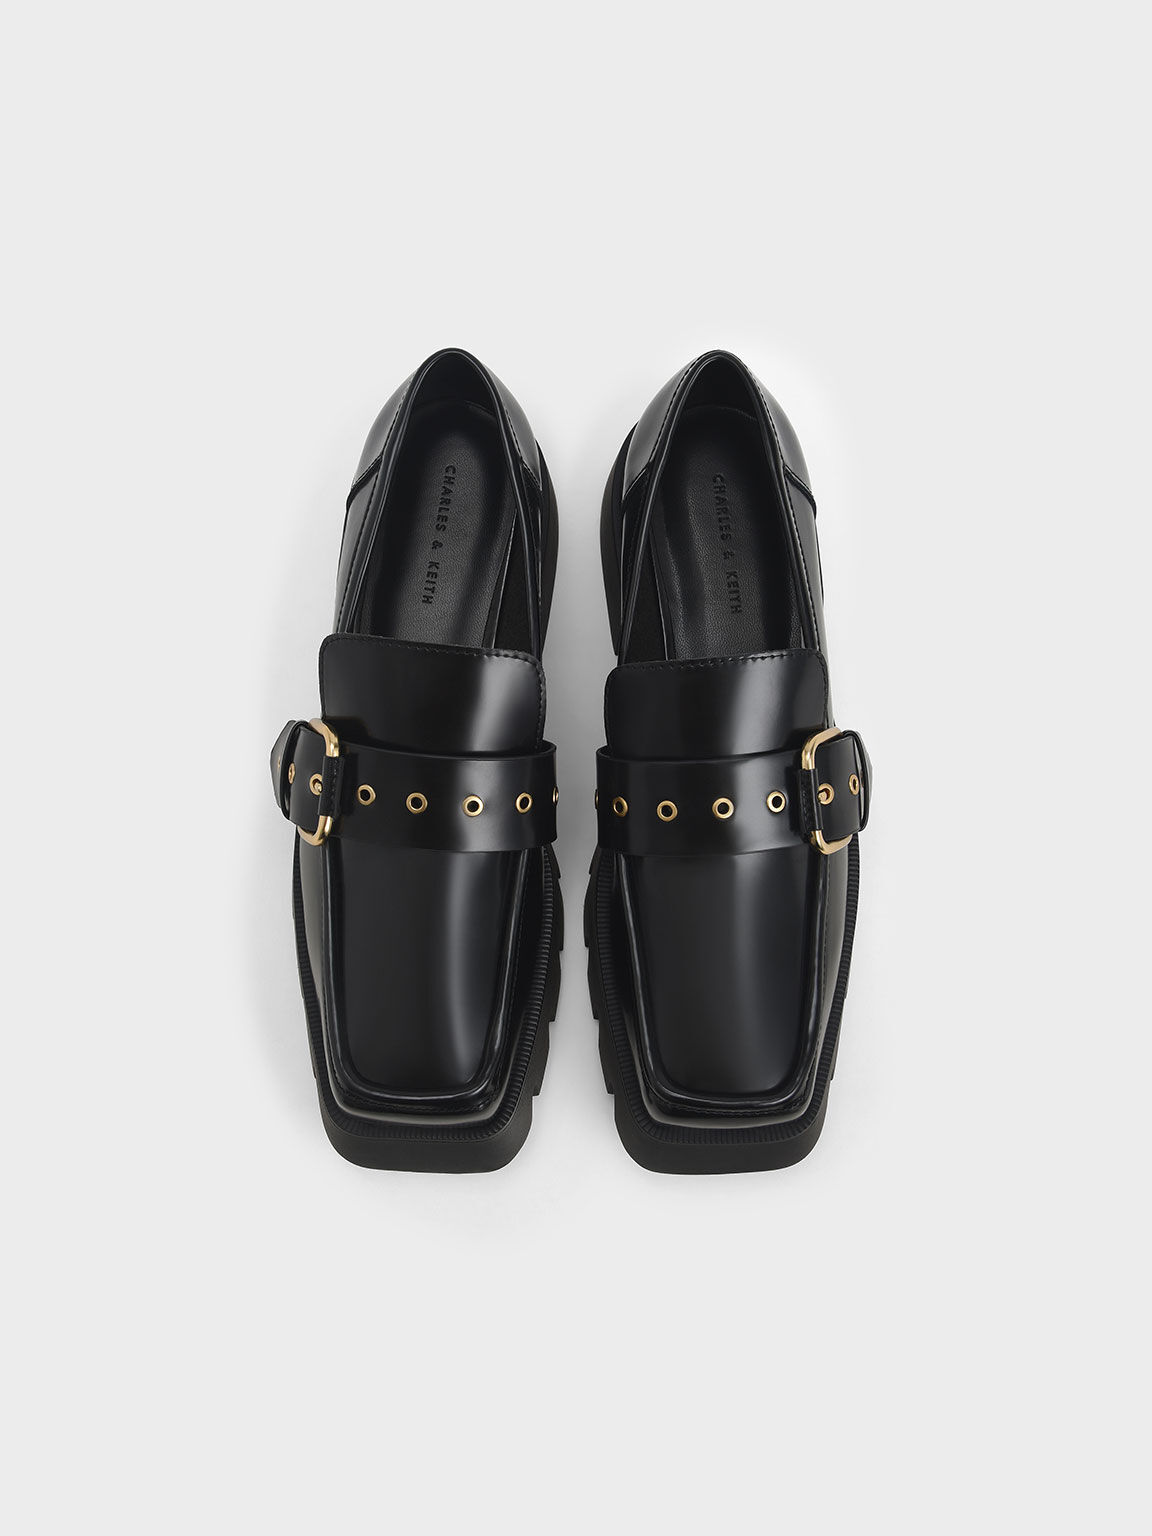 Fay Buckled Chunky Penny Loafers, Black, hi-res